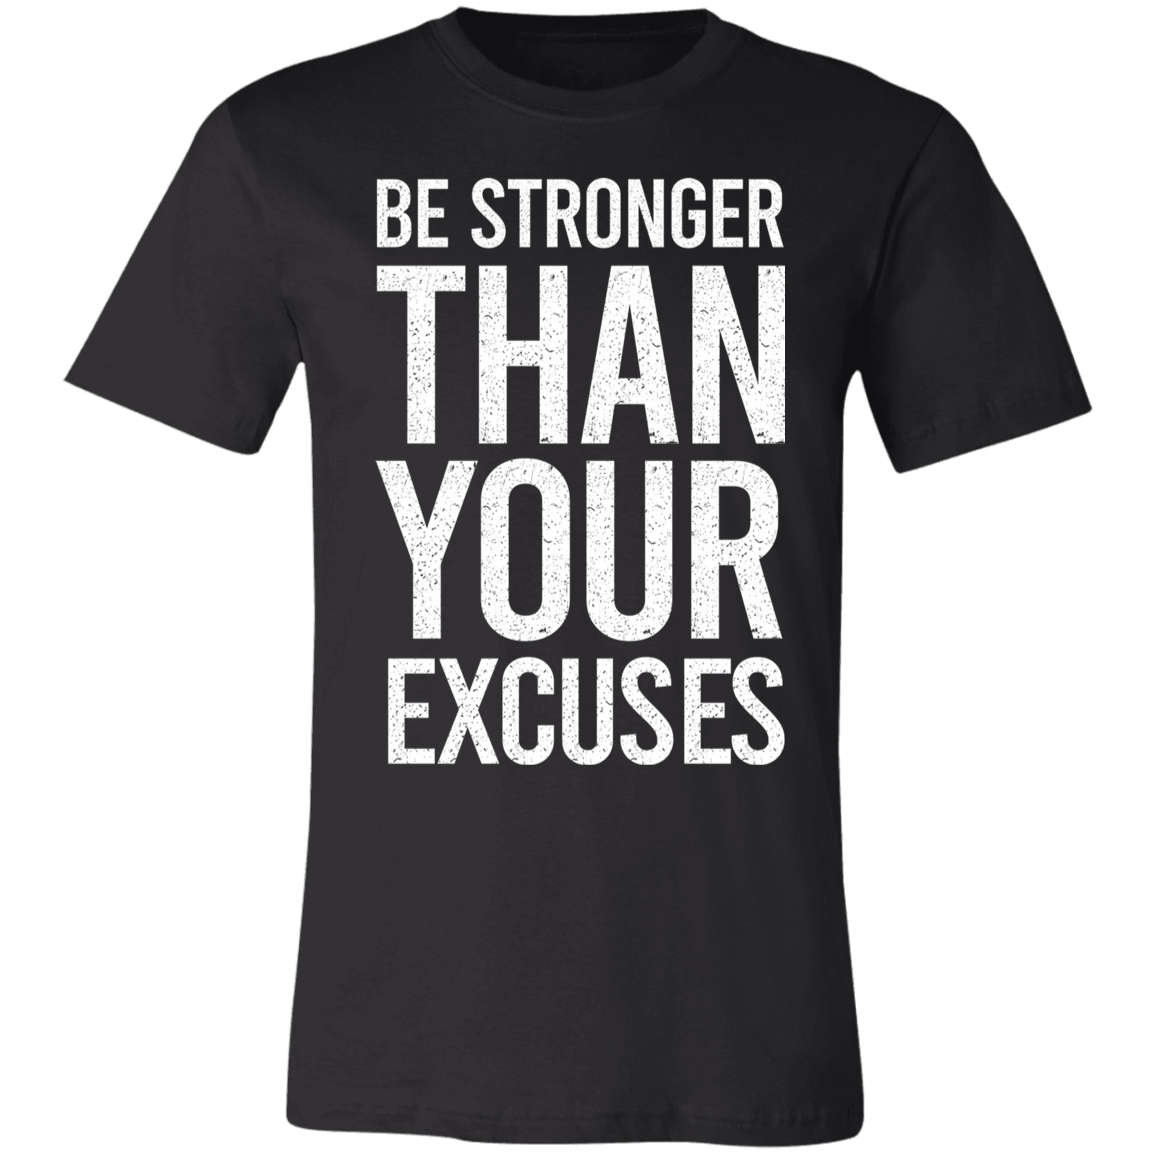 Be Stronger than your Excuses Premium Women's Tee - Game Day Getup